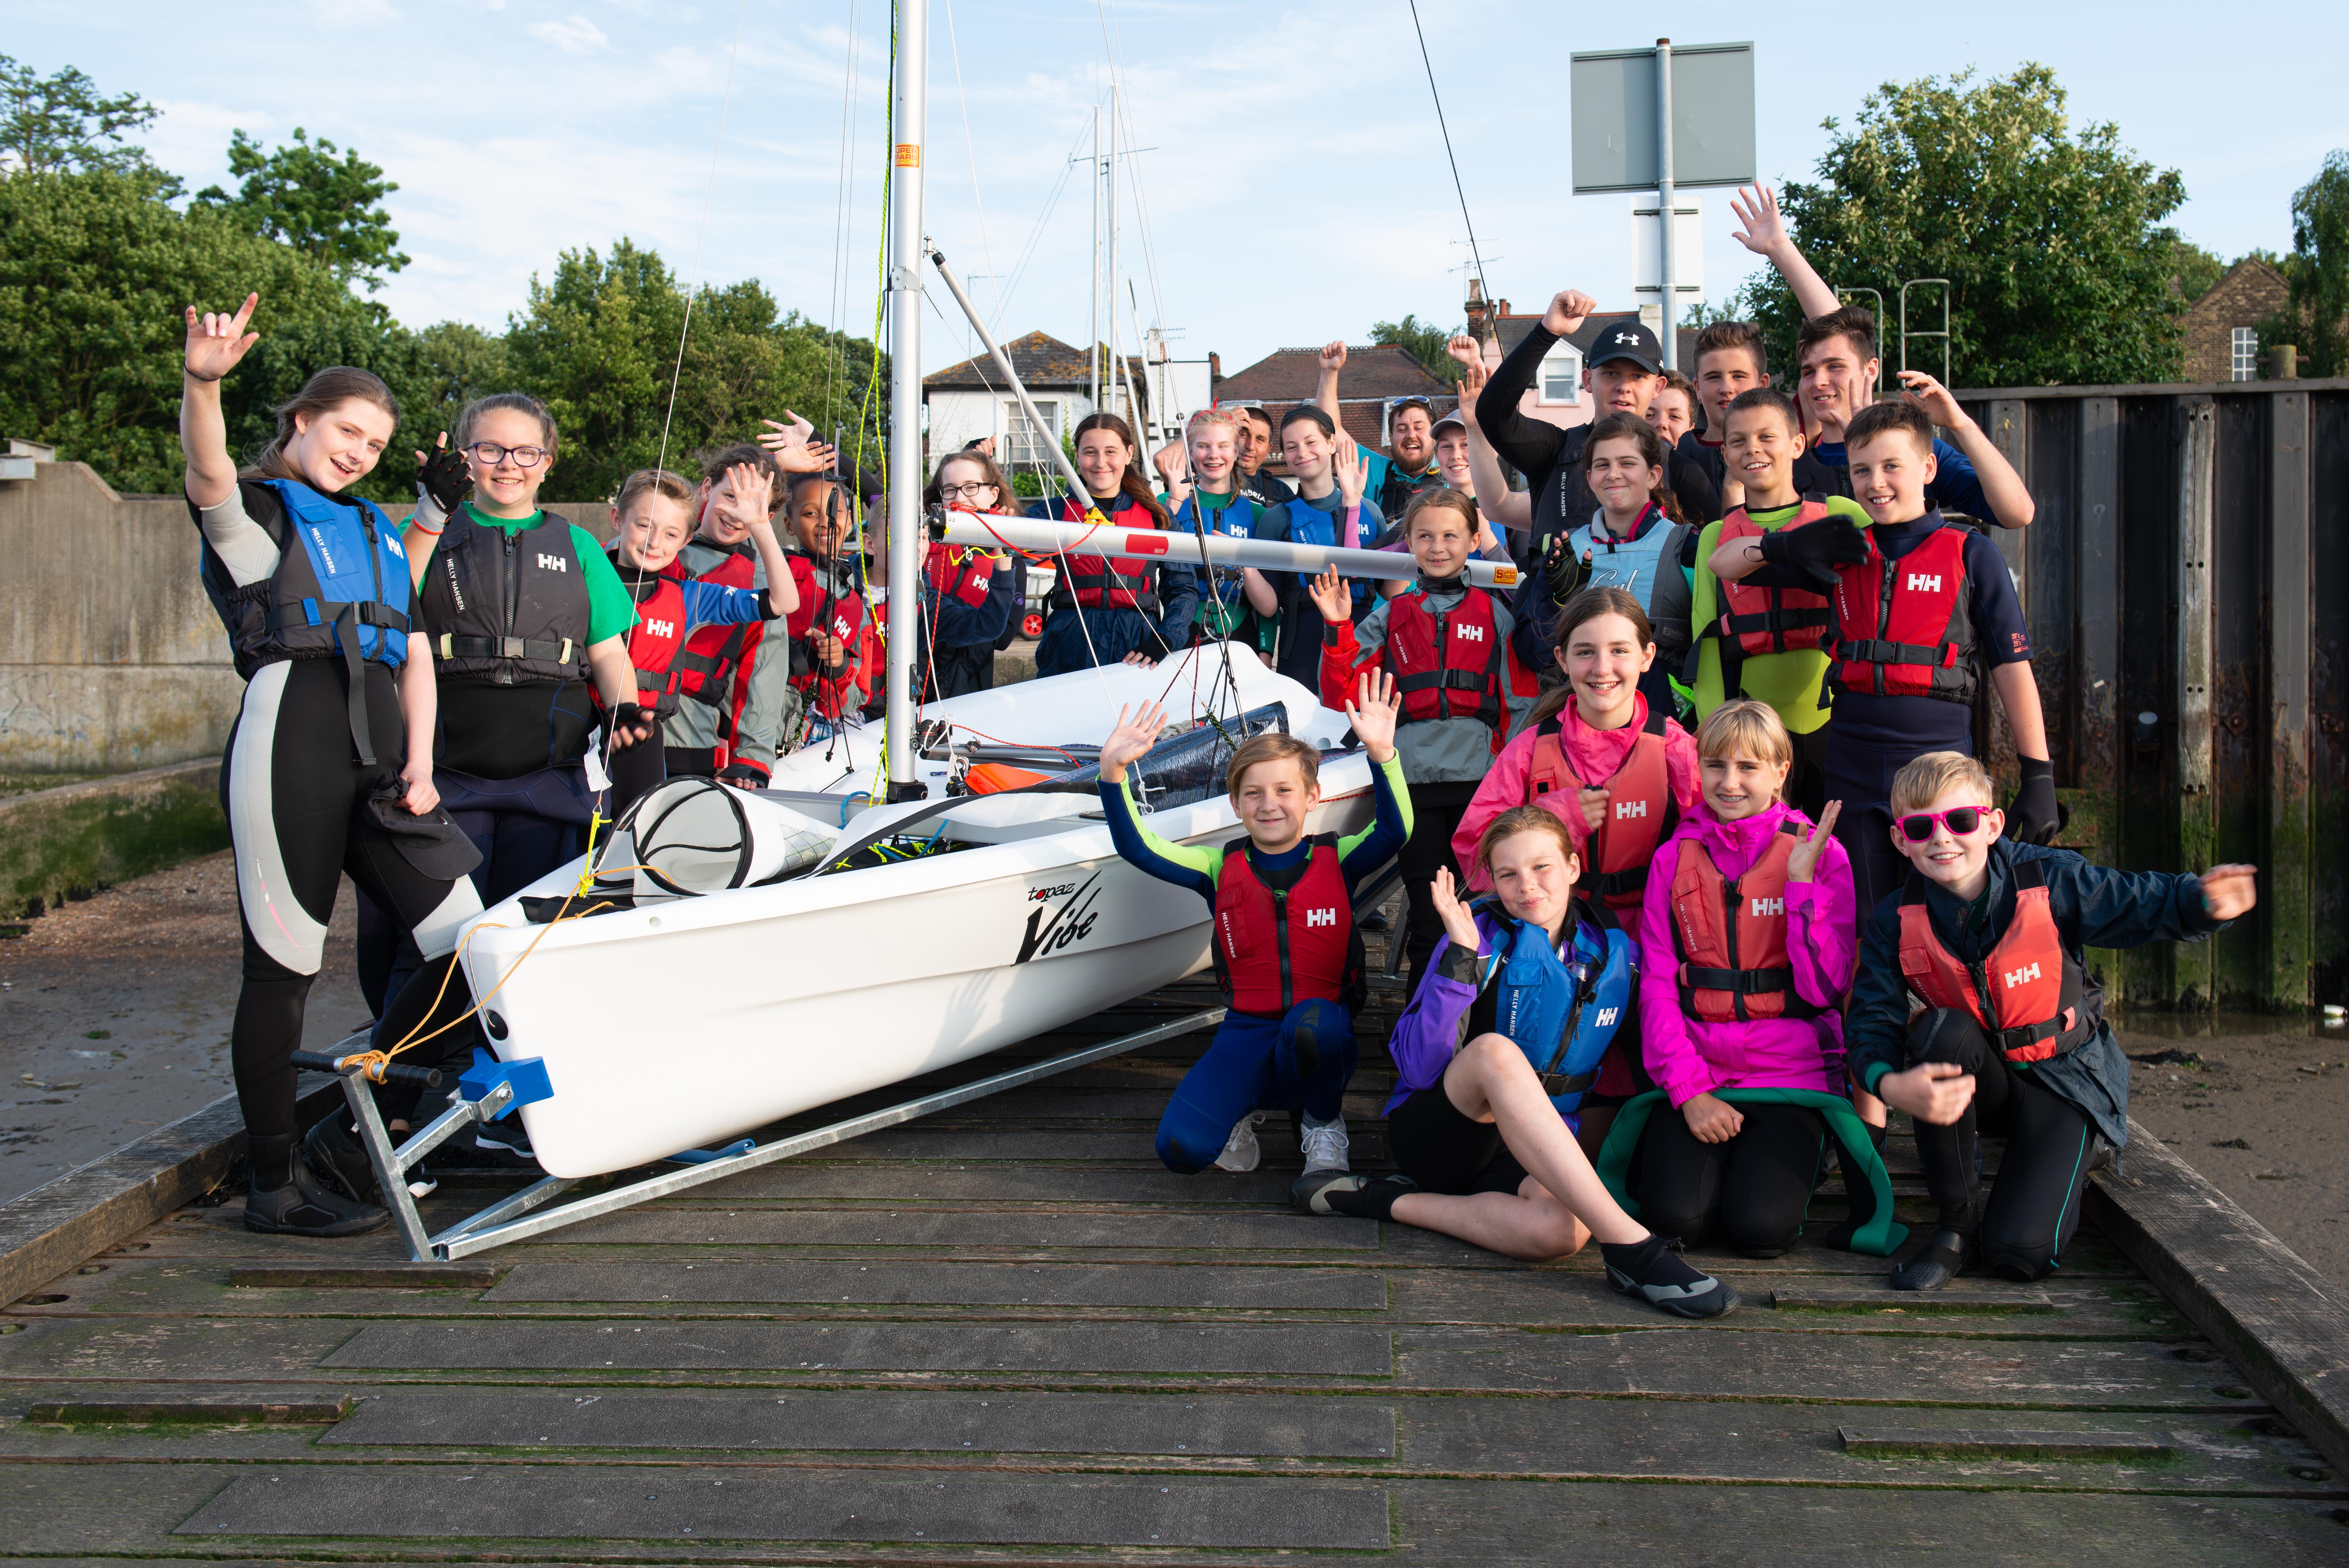 Extra funding flows for watersports clubs on tidal Thames